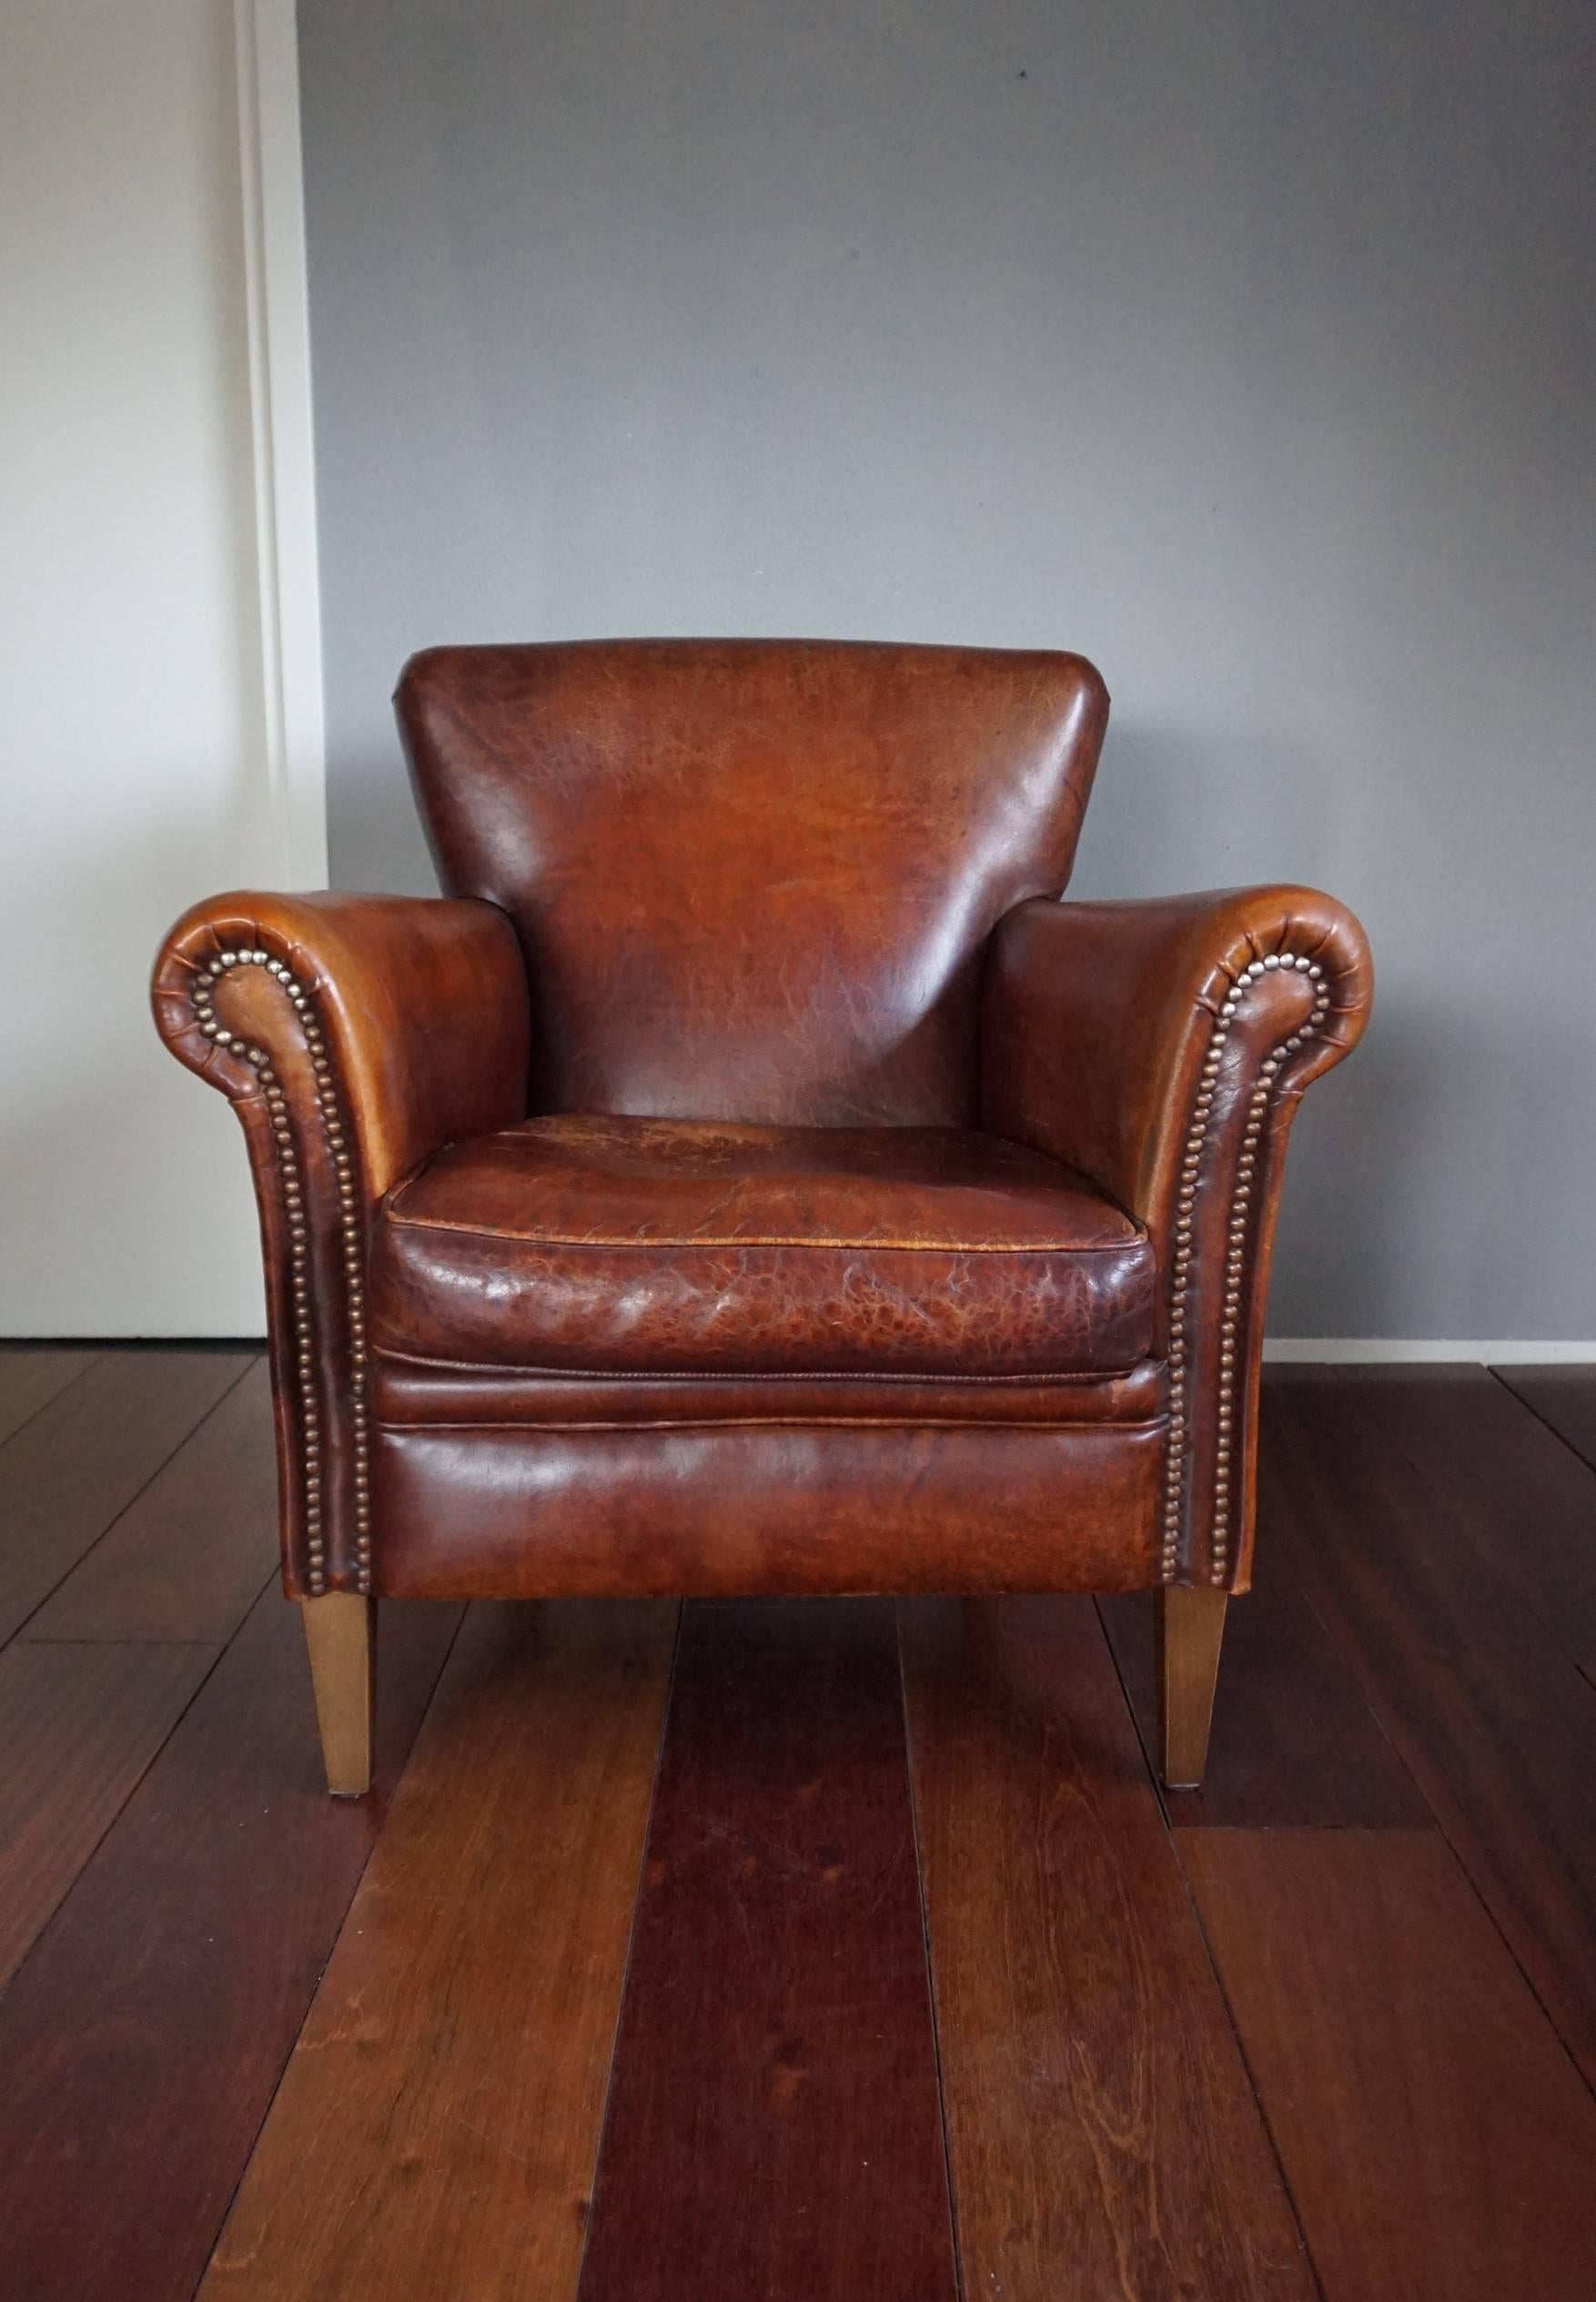 Wonderful design and color leather armchair.

This sheep leather chair is perfect for relaxing, music listening, reading or watching your favourite tv-show. This hand-patinated chair has the most beautiful and warm color and it is exactly for that